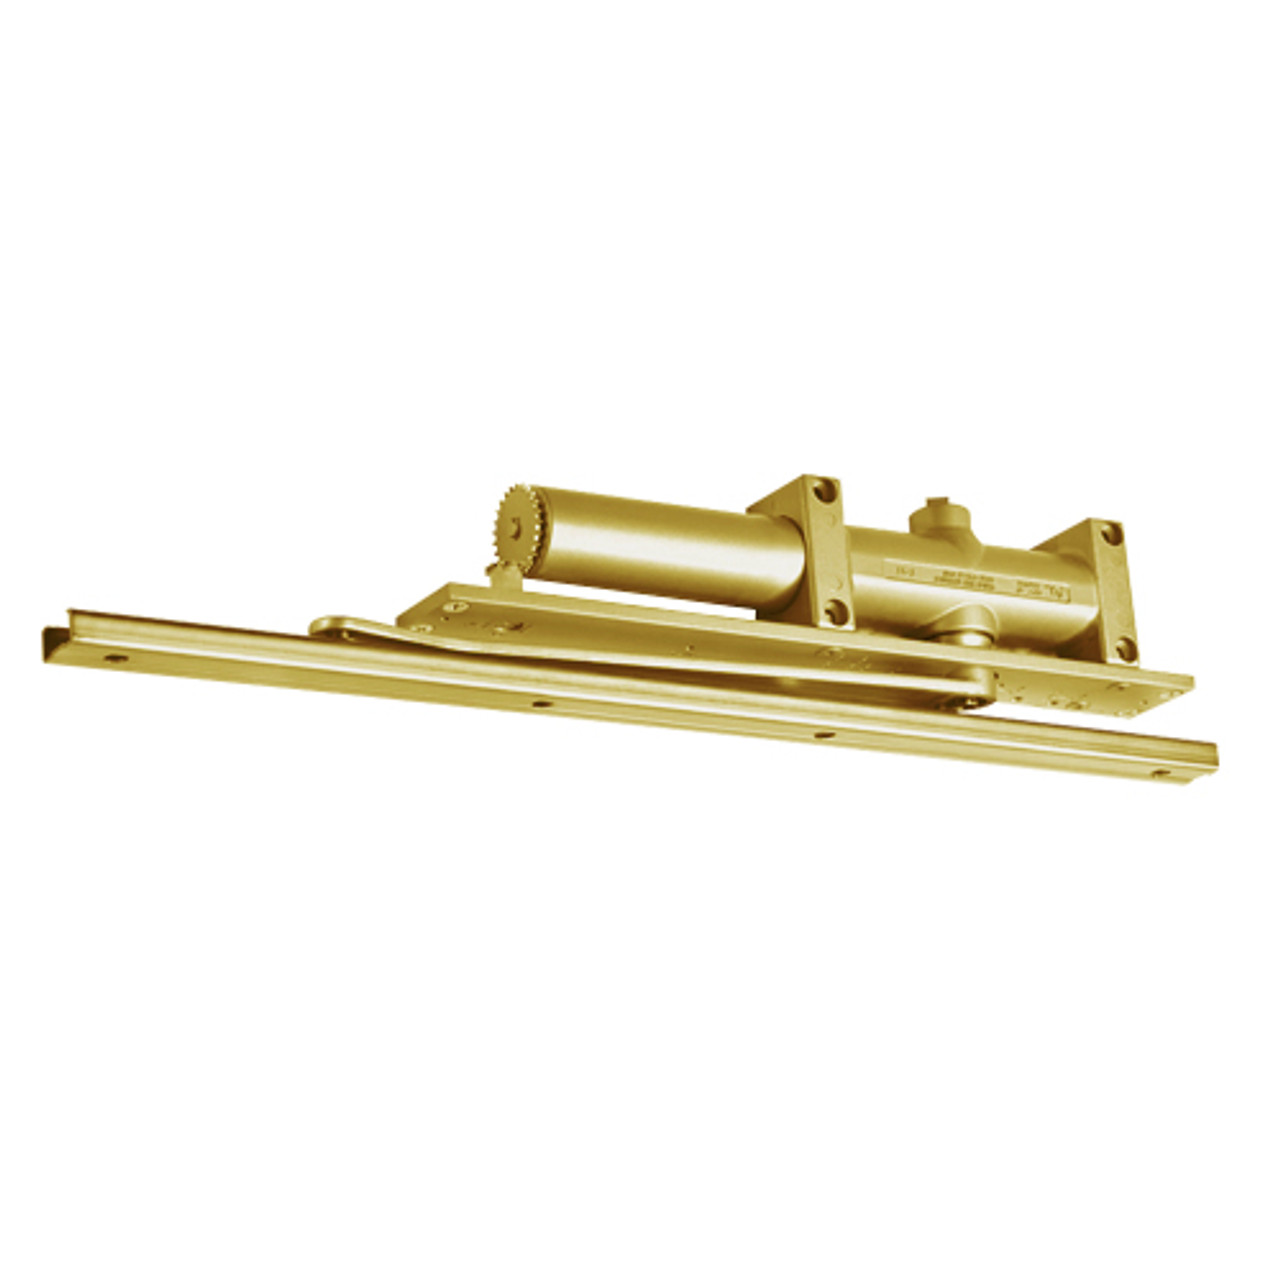 7906-696-RH Norton 7900 Series Non-Hold Open Overhead Concealed Closers with Spring Size 6 in Gold Finish